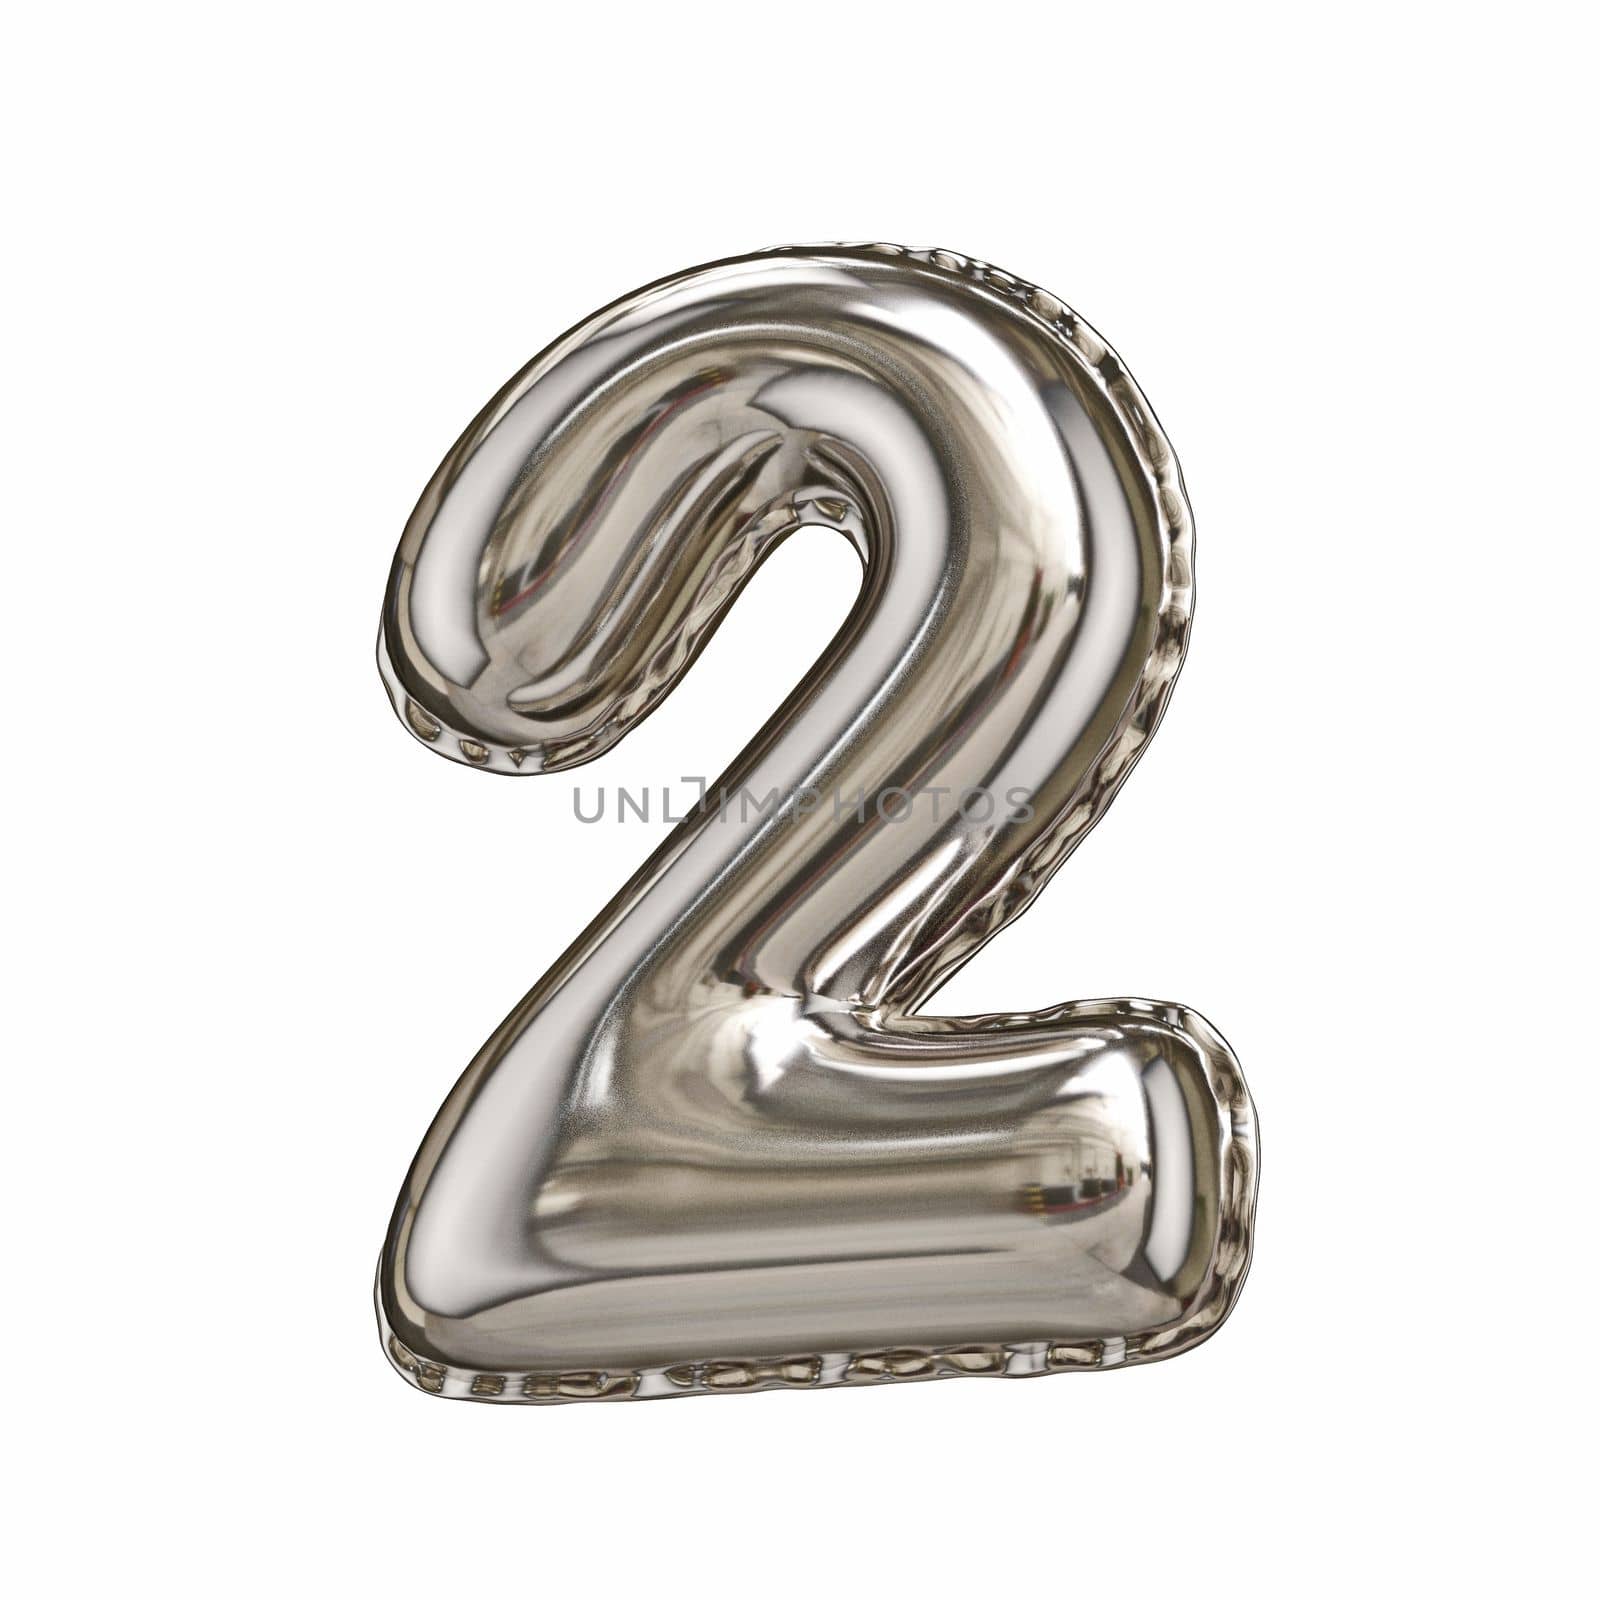 Silver foil balloon font number 2 TWO 3D rendering illustration isolated on white background